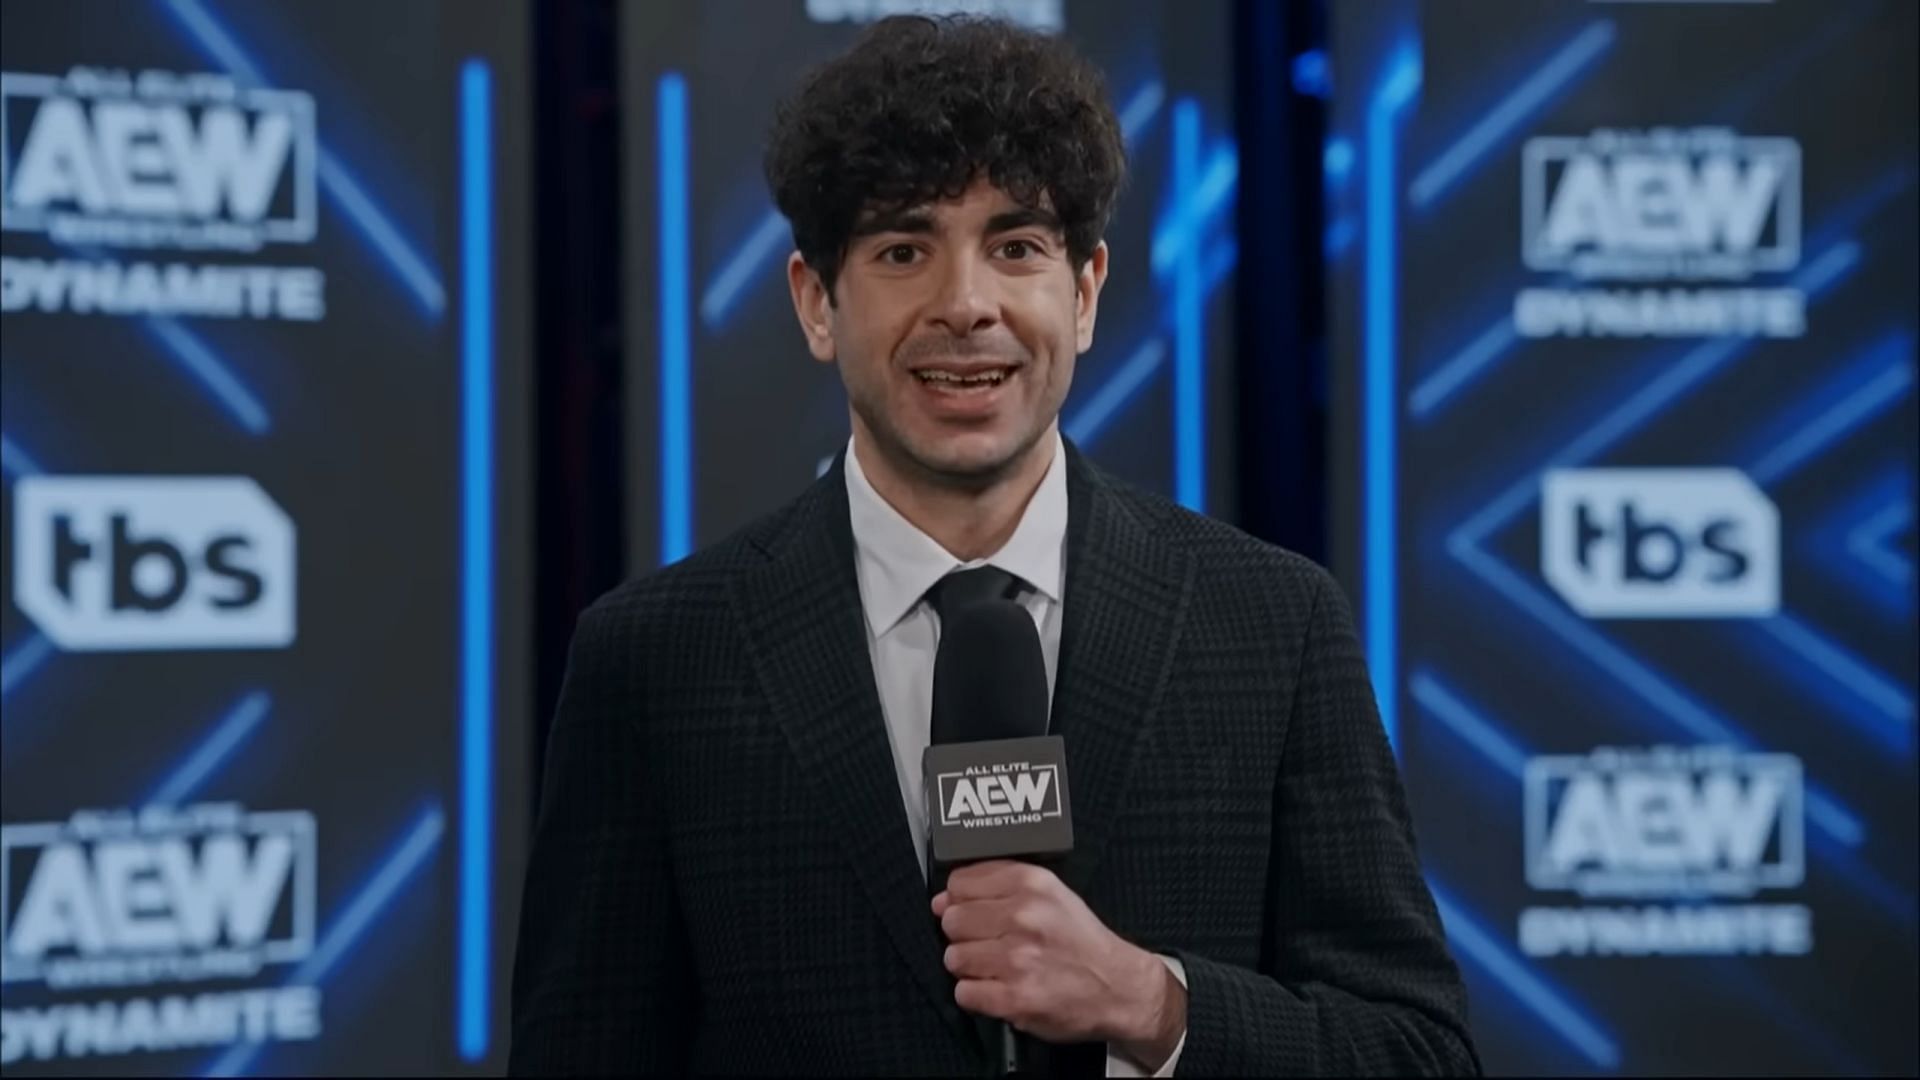 Tony Khan is the CEO and President of AEW